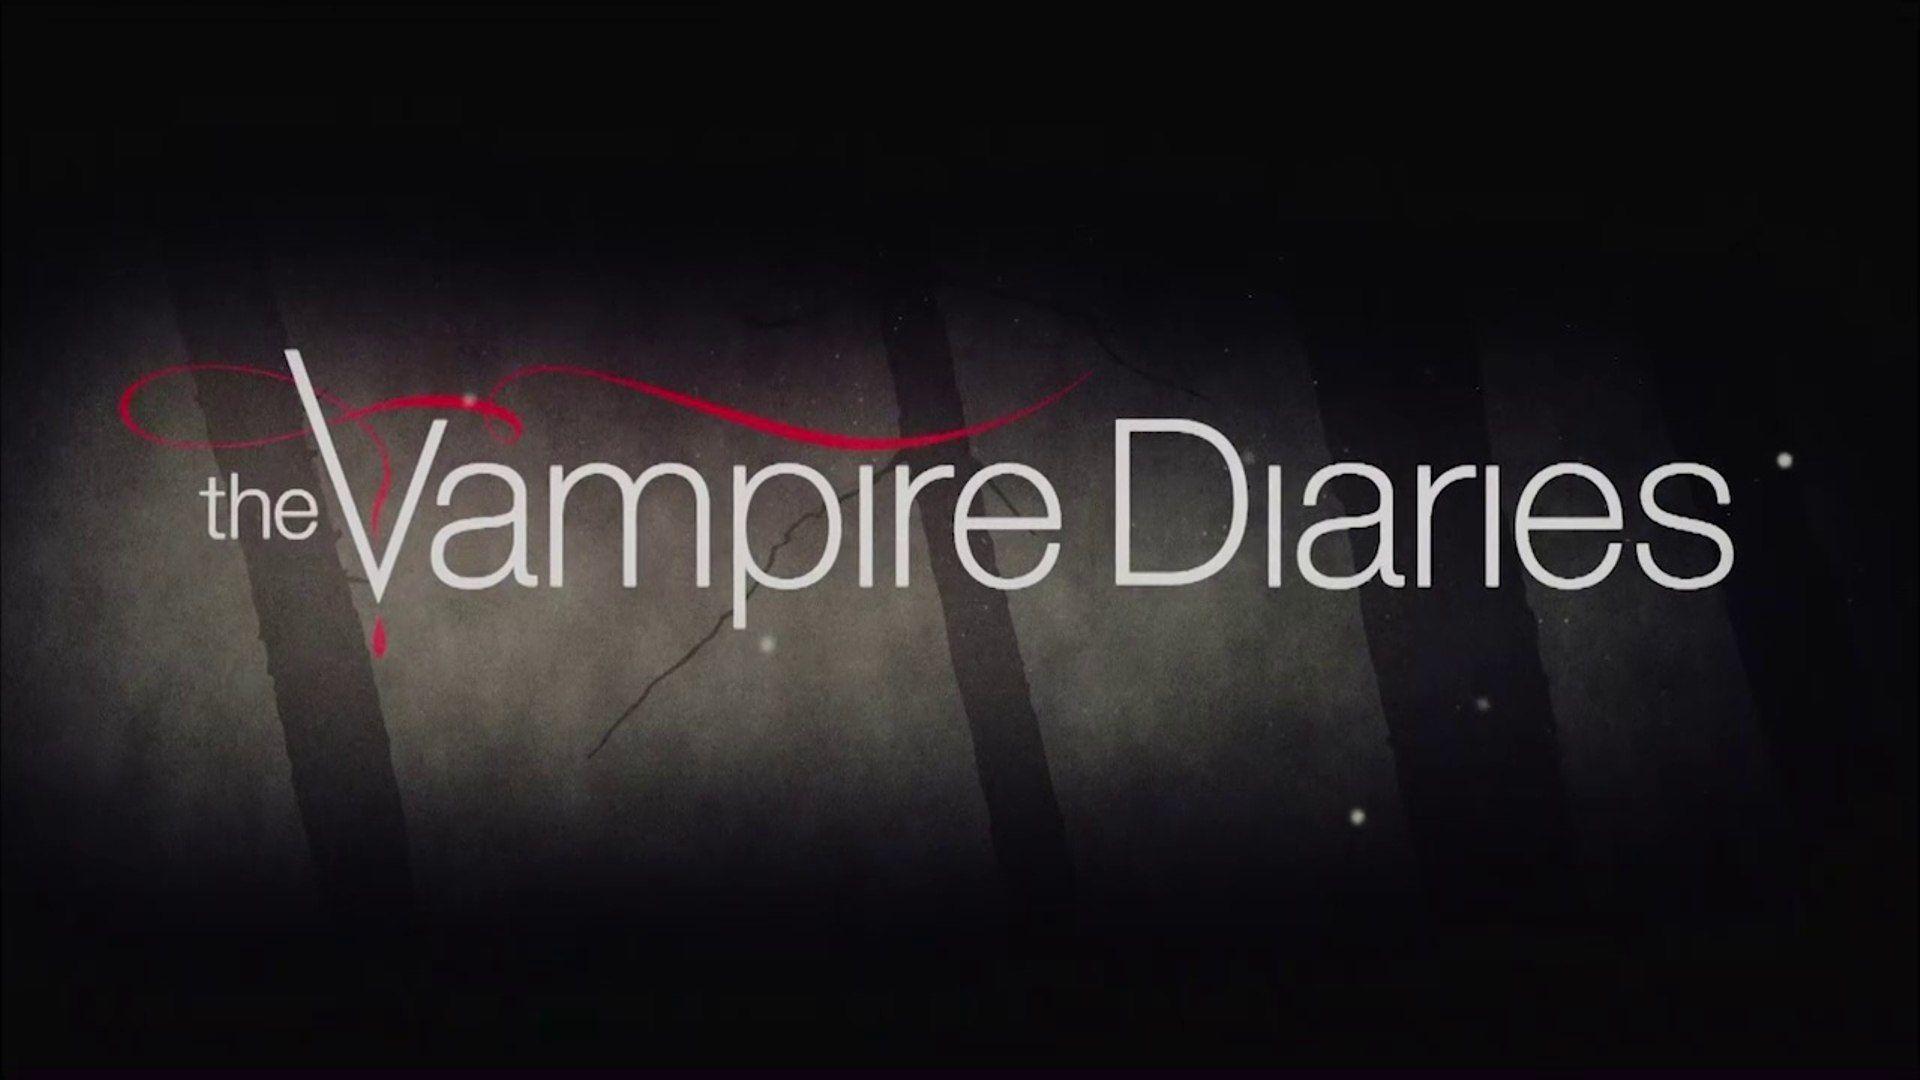 The Vampire Diaries Logo - The Vampire Diaries After Show Season 6 Episode 3 Welcome to